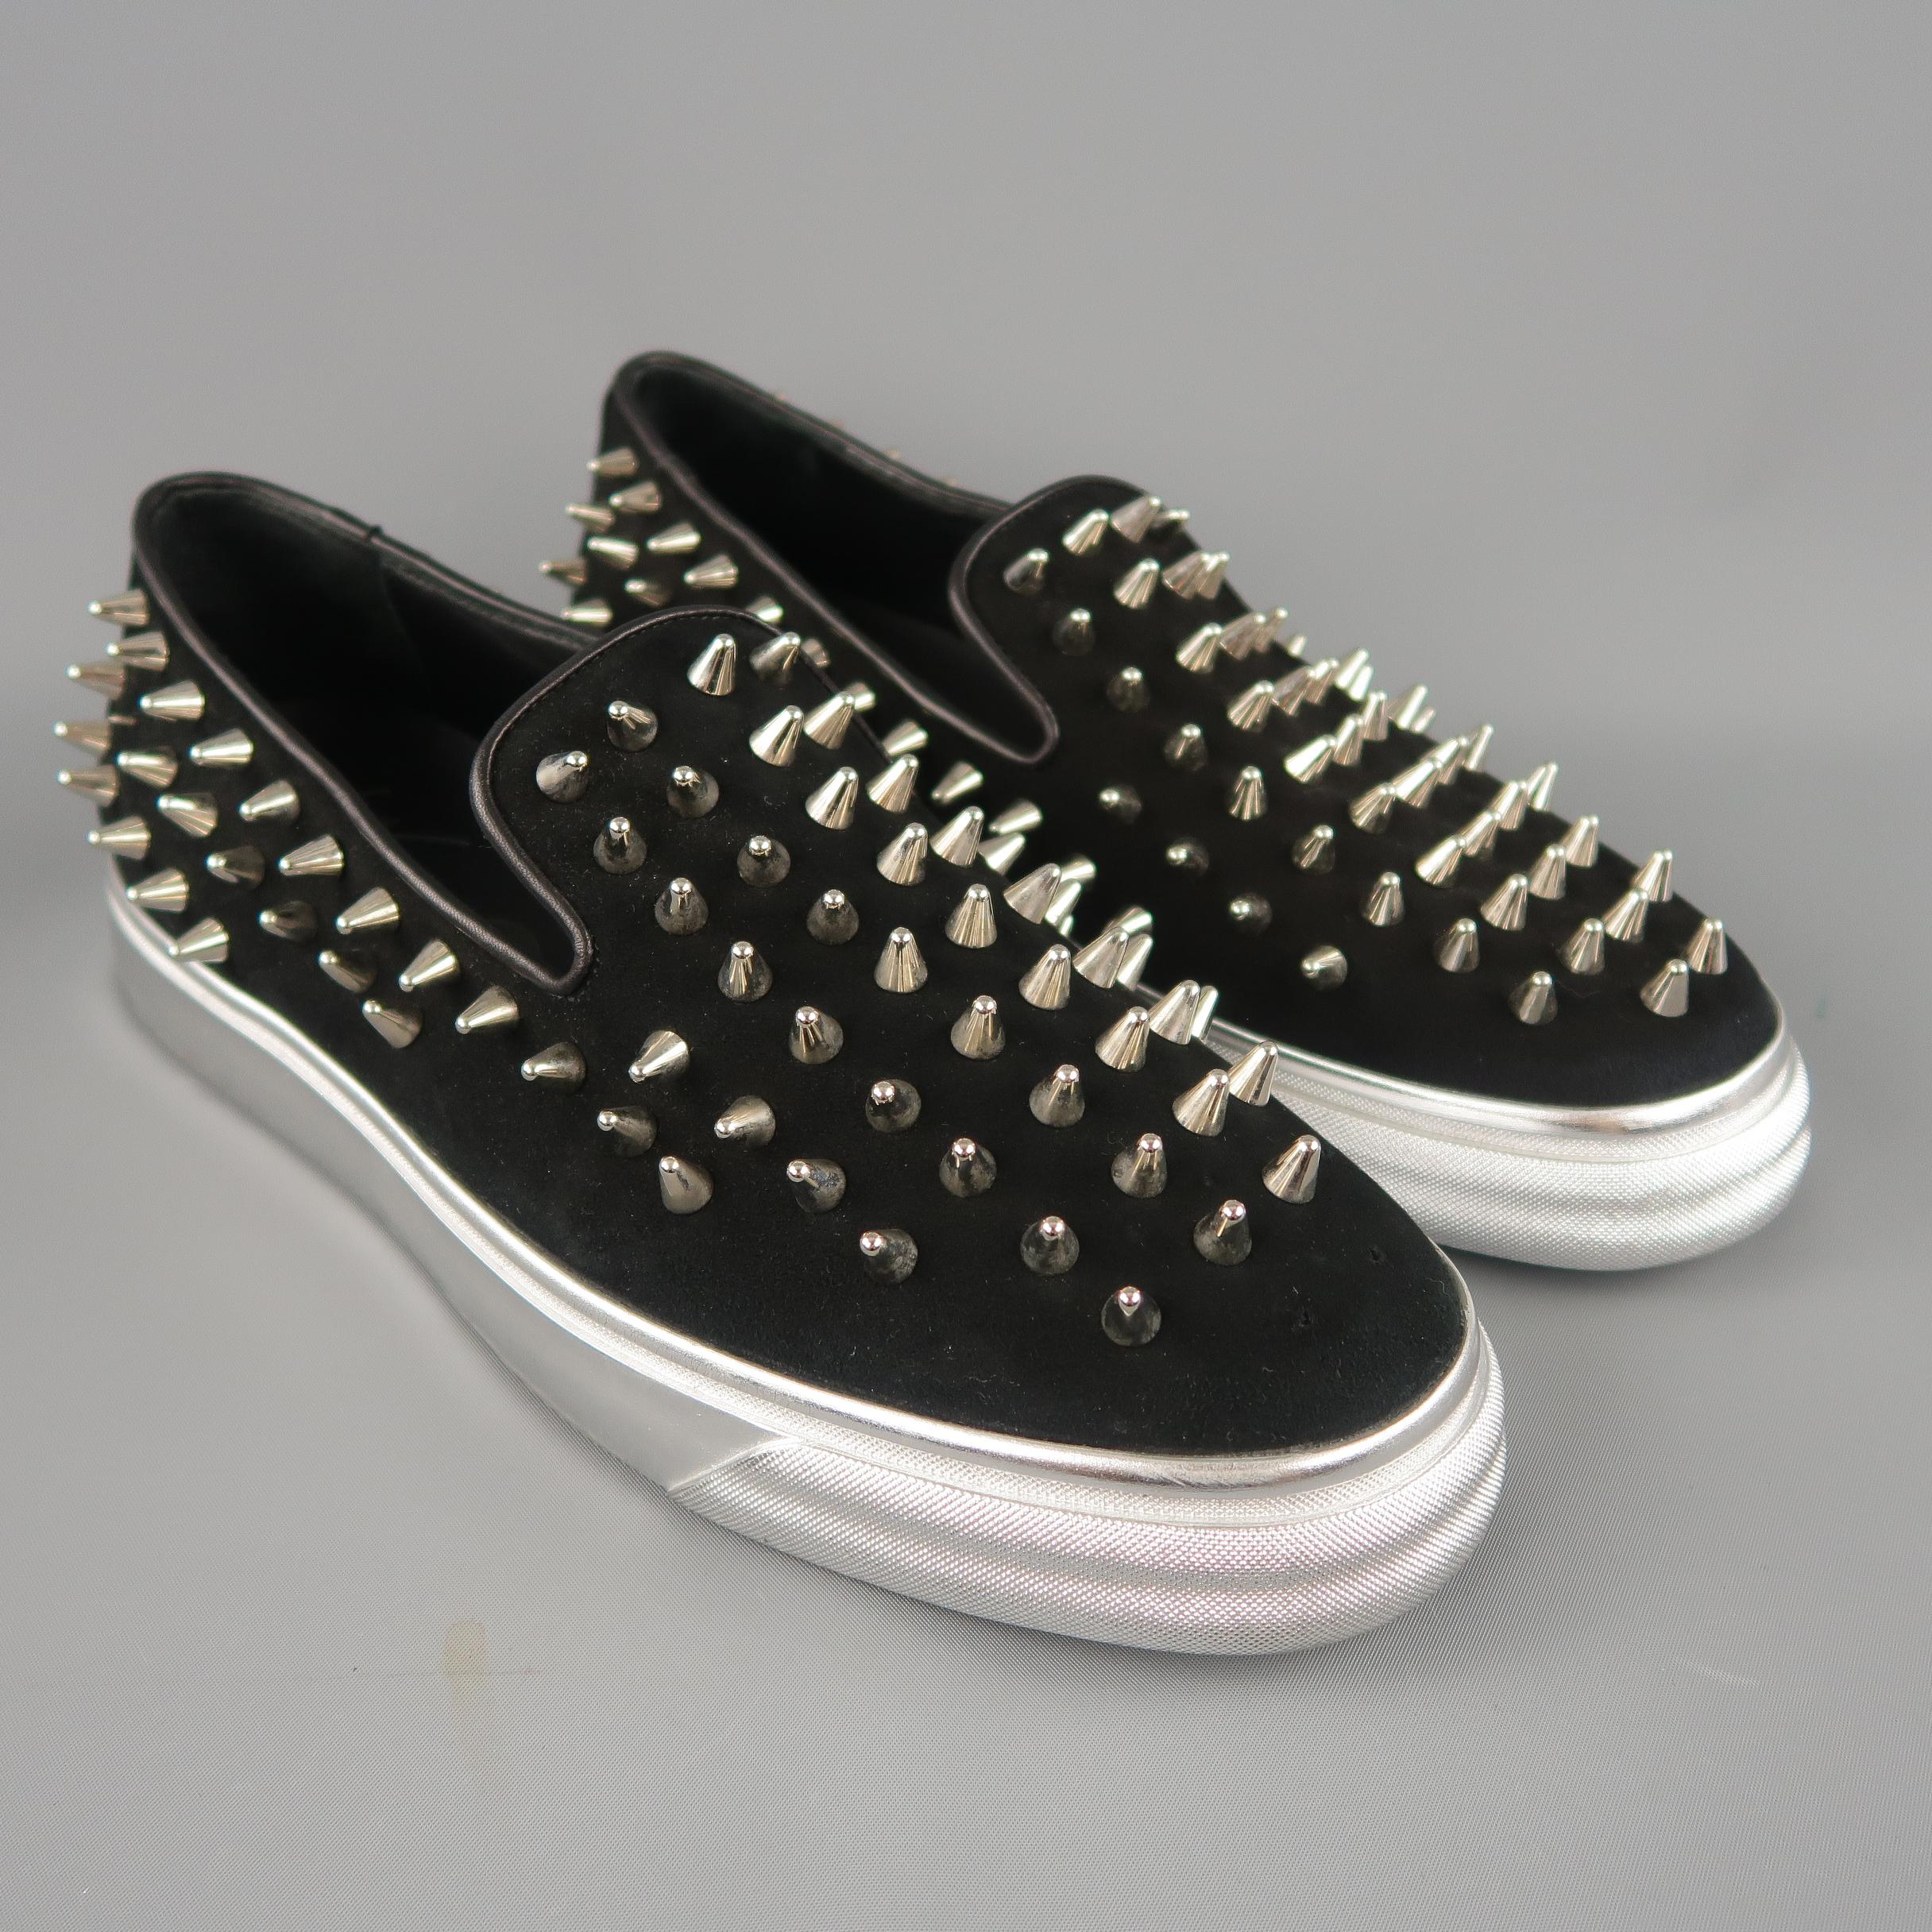 GIUSEPPE ZANOTTI Thorn Studded slip on sneakers come in black suede with silver tone cone spikes throughout and a metallic silver rubber sole. Right Shoe Missing a couple spikes on toe. As-is. Made in Italy.
 
Excellent Pre-Owned Condition.
Marked: